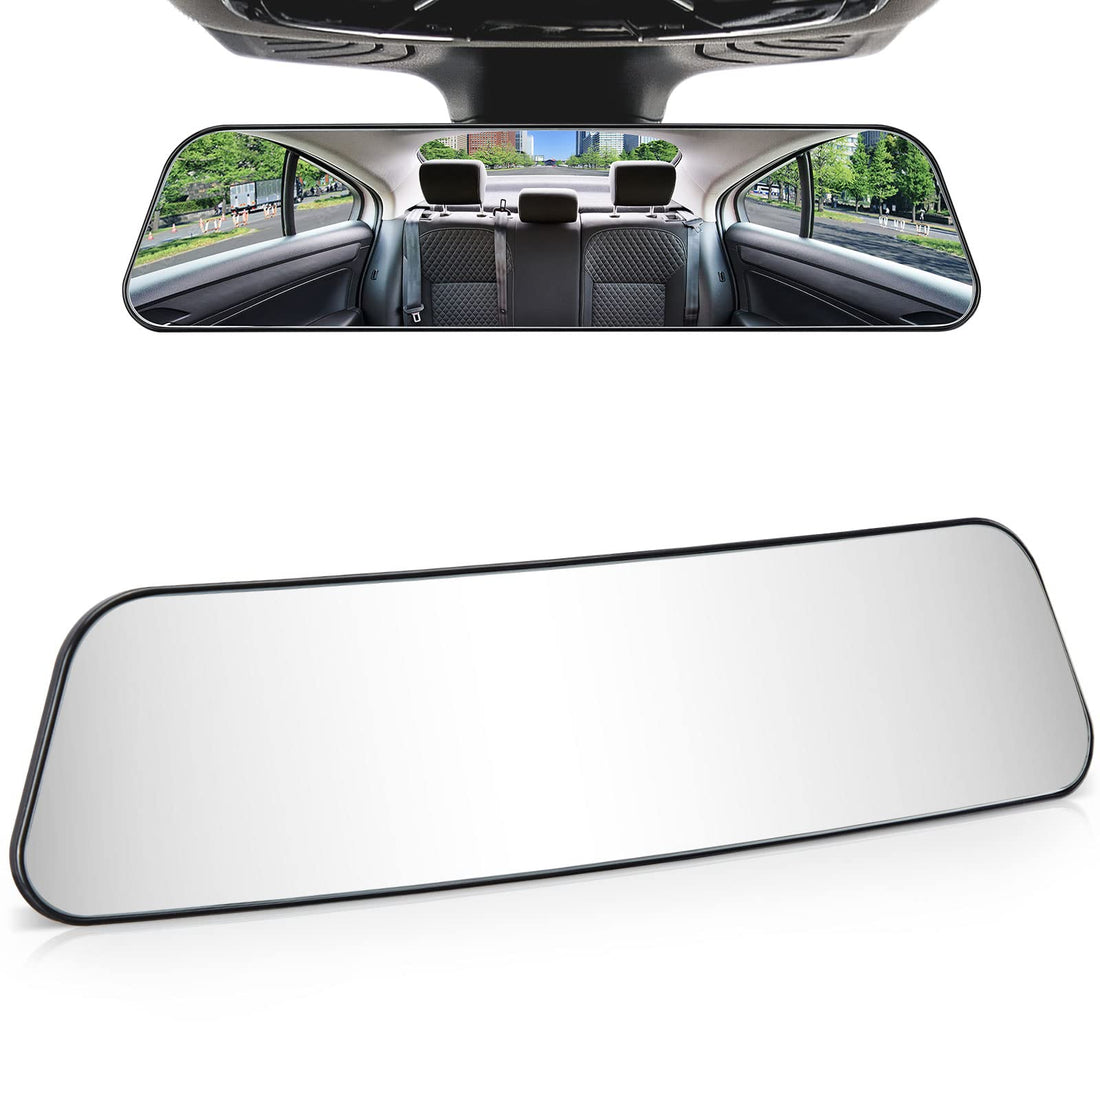 12 Inch Panoramic Rearview Mirror, Interior Clip-on Wide Angle Convex Universal Rear View Mirror